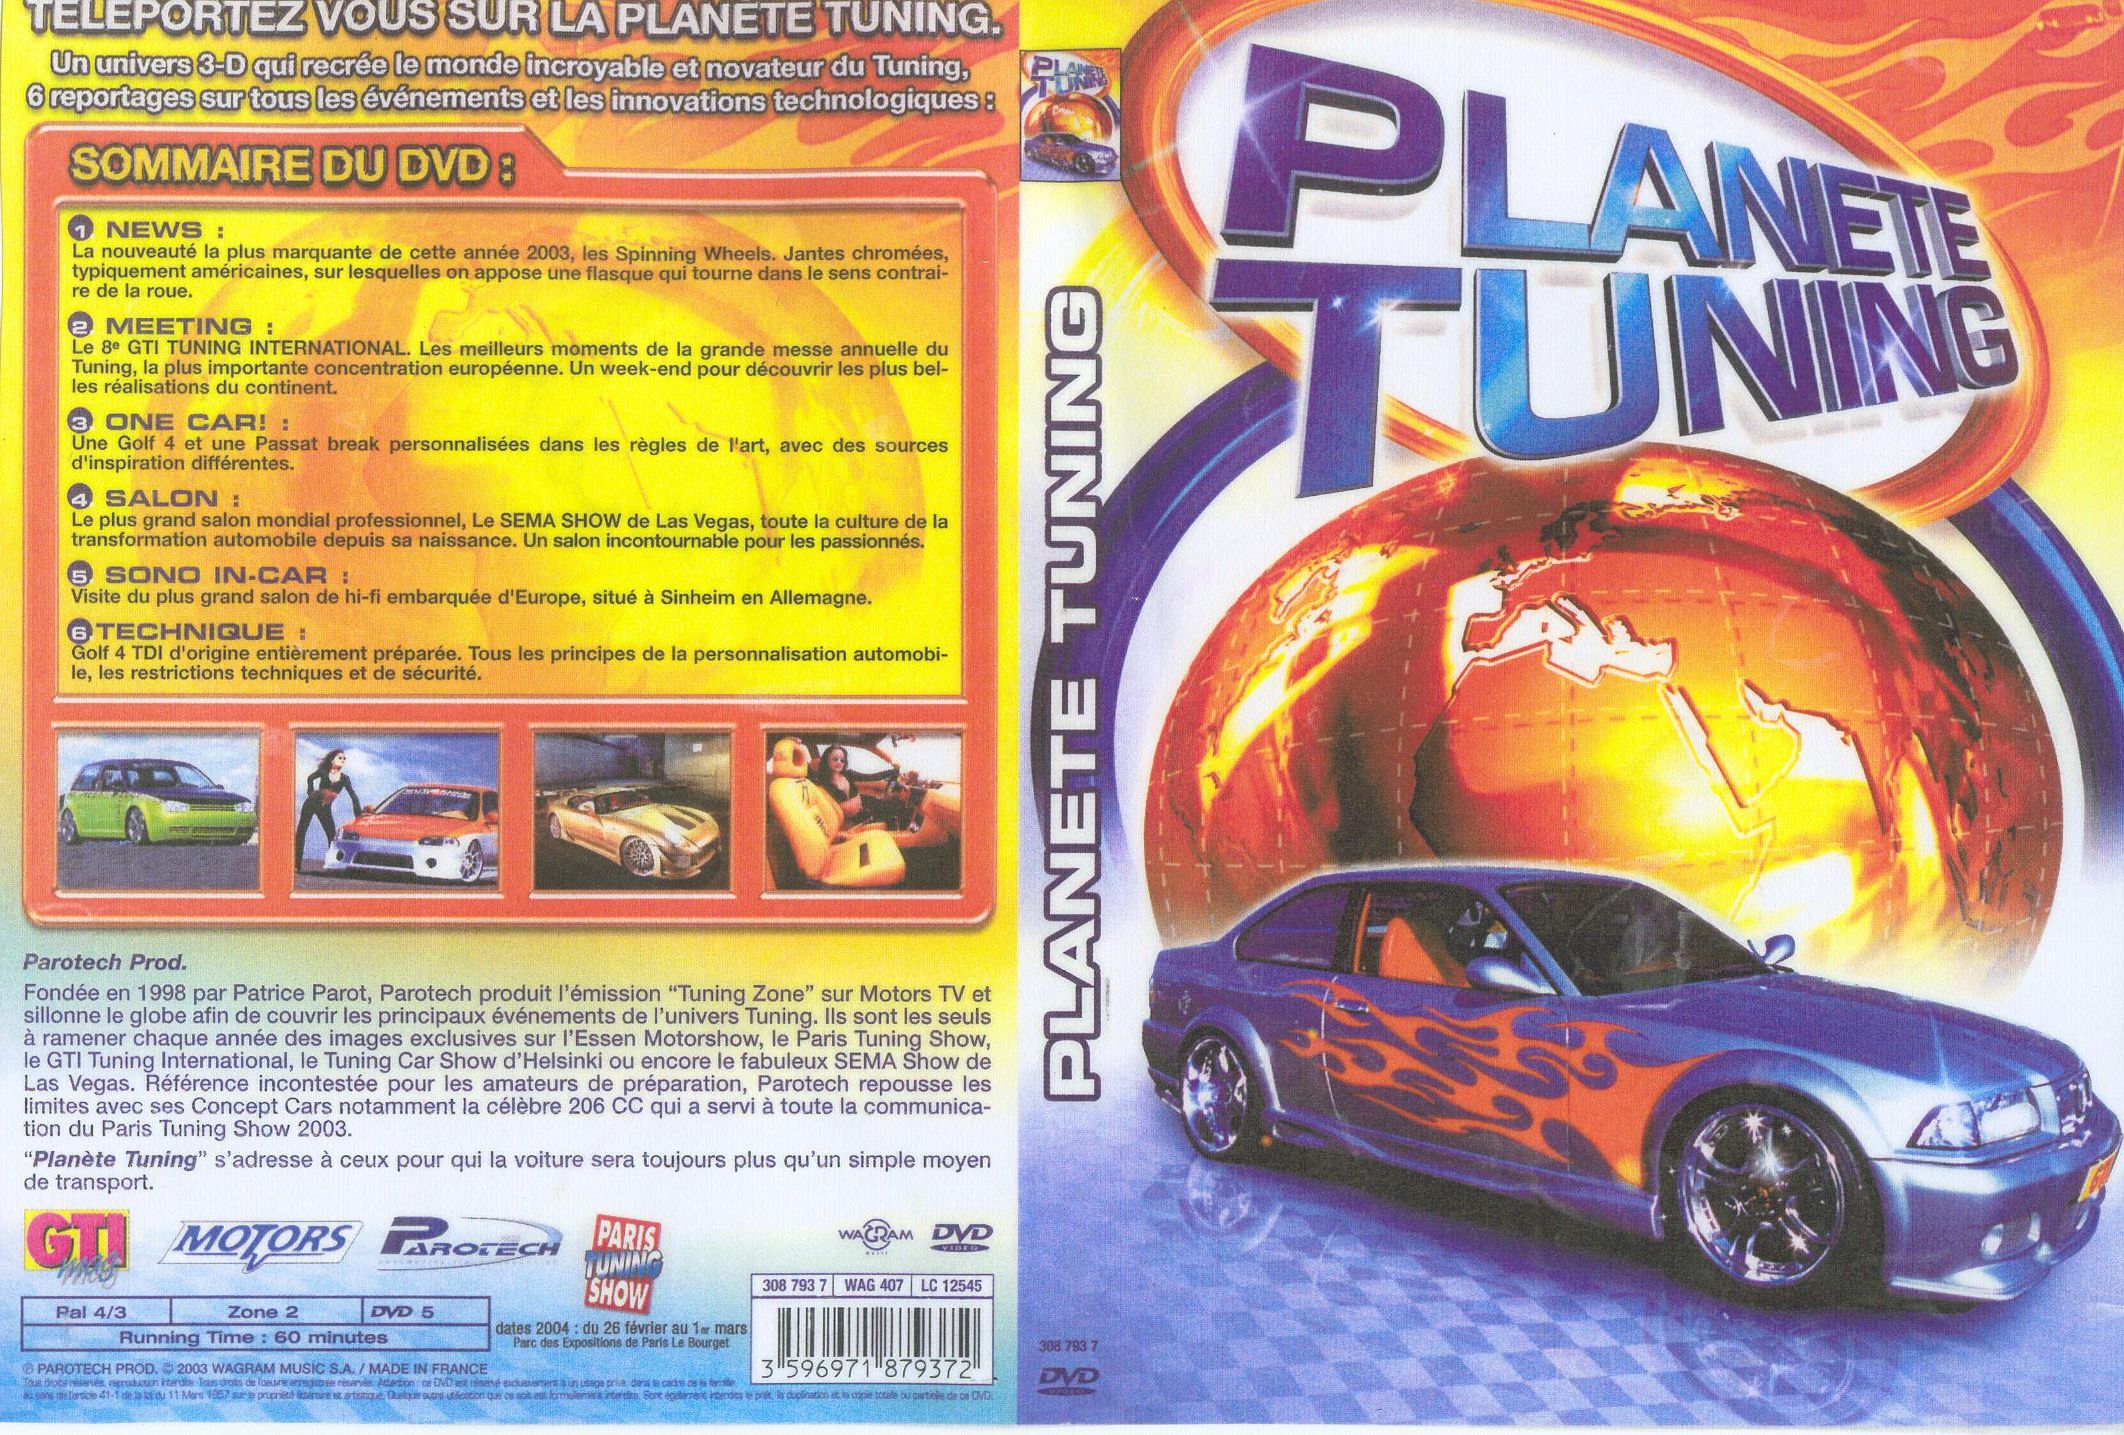 Jaquette DVD Planete tunning